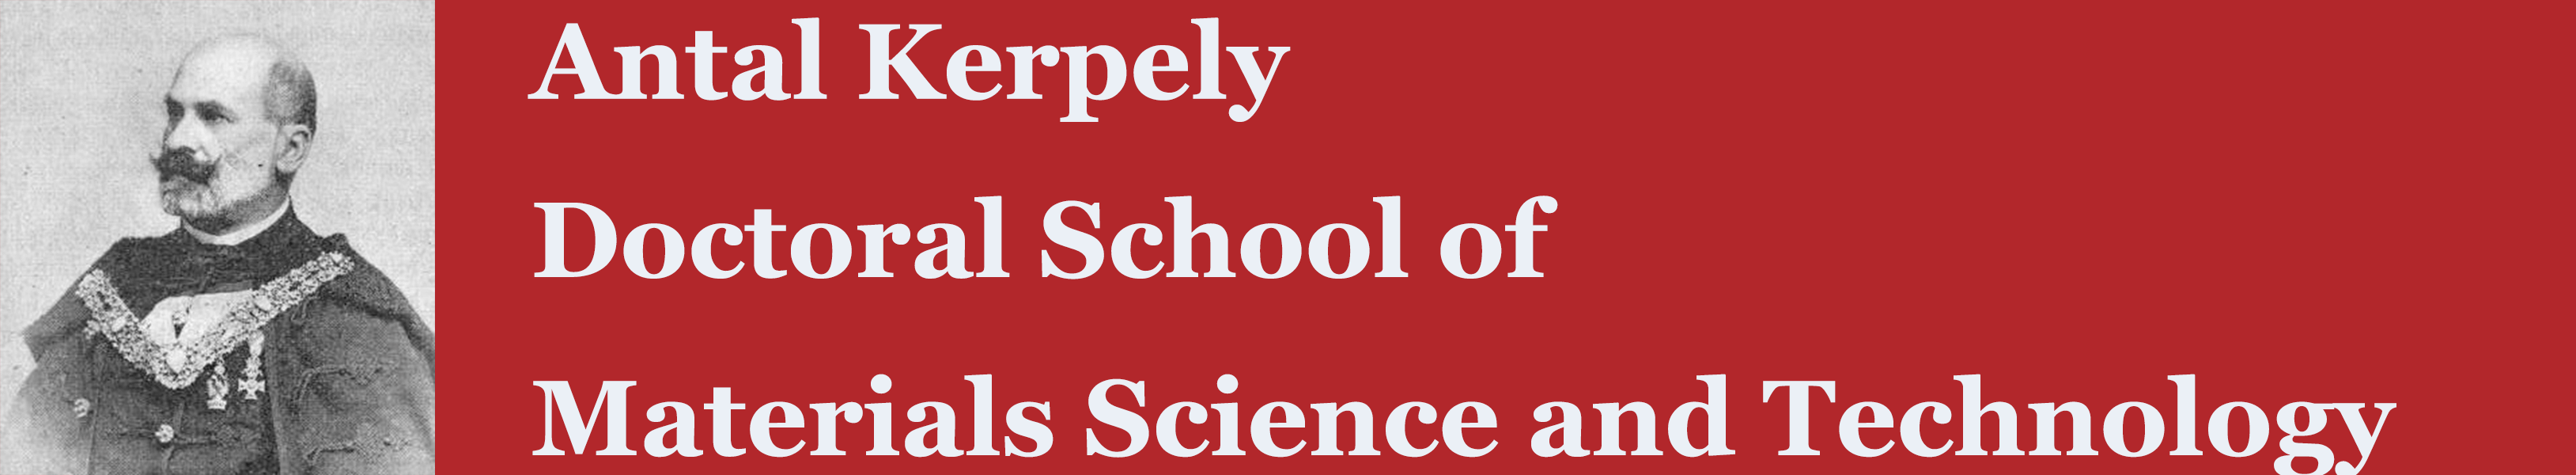 Antal Kerpely Doctoral School of Materials Science & Technology